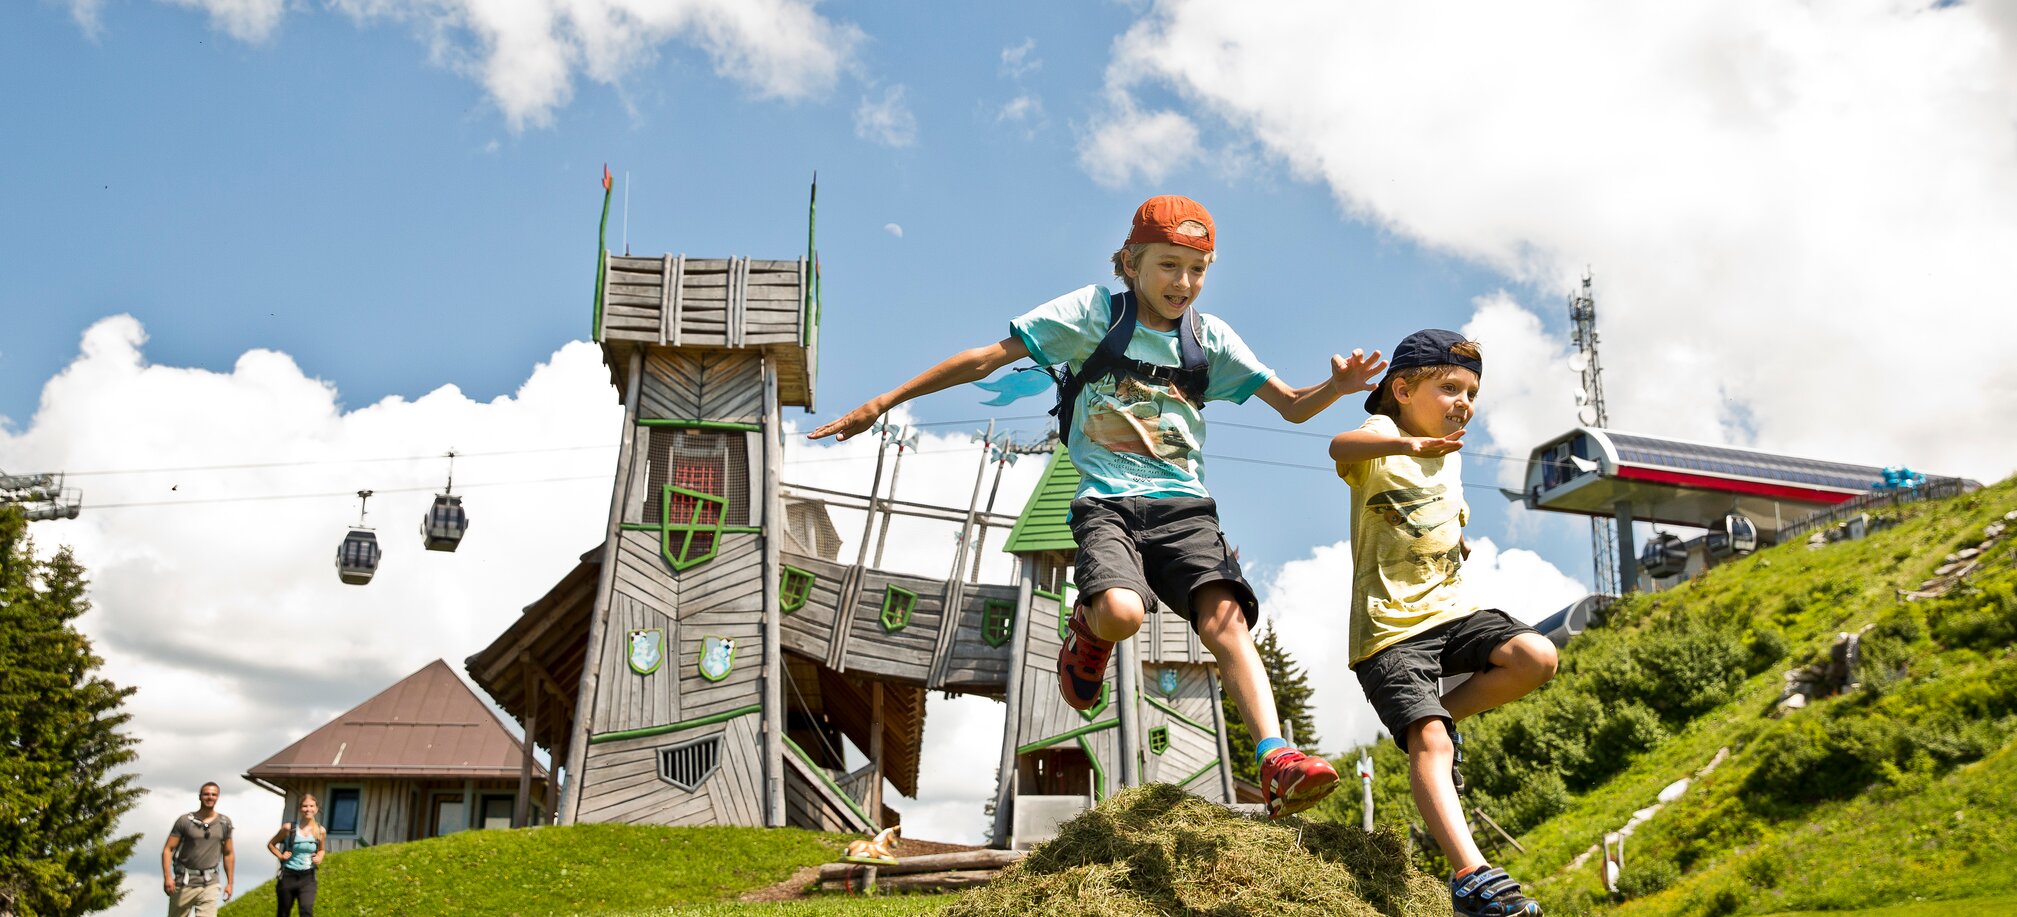 Two children are jumping over a small grassy hill and in the background you can see a playground that looks like a castle | © sanktjohann.com, Mirja Geh